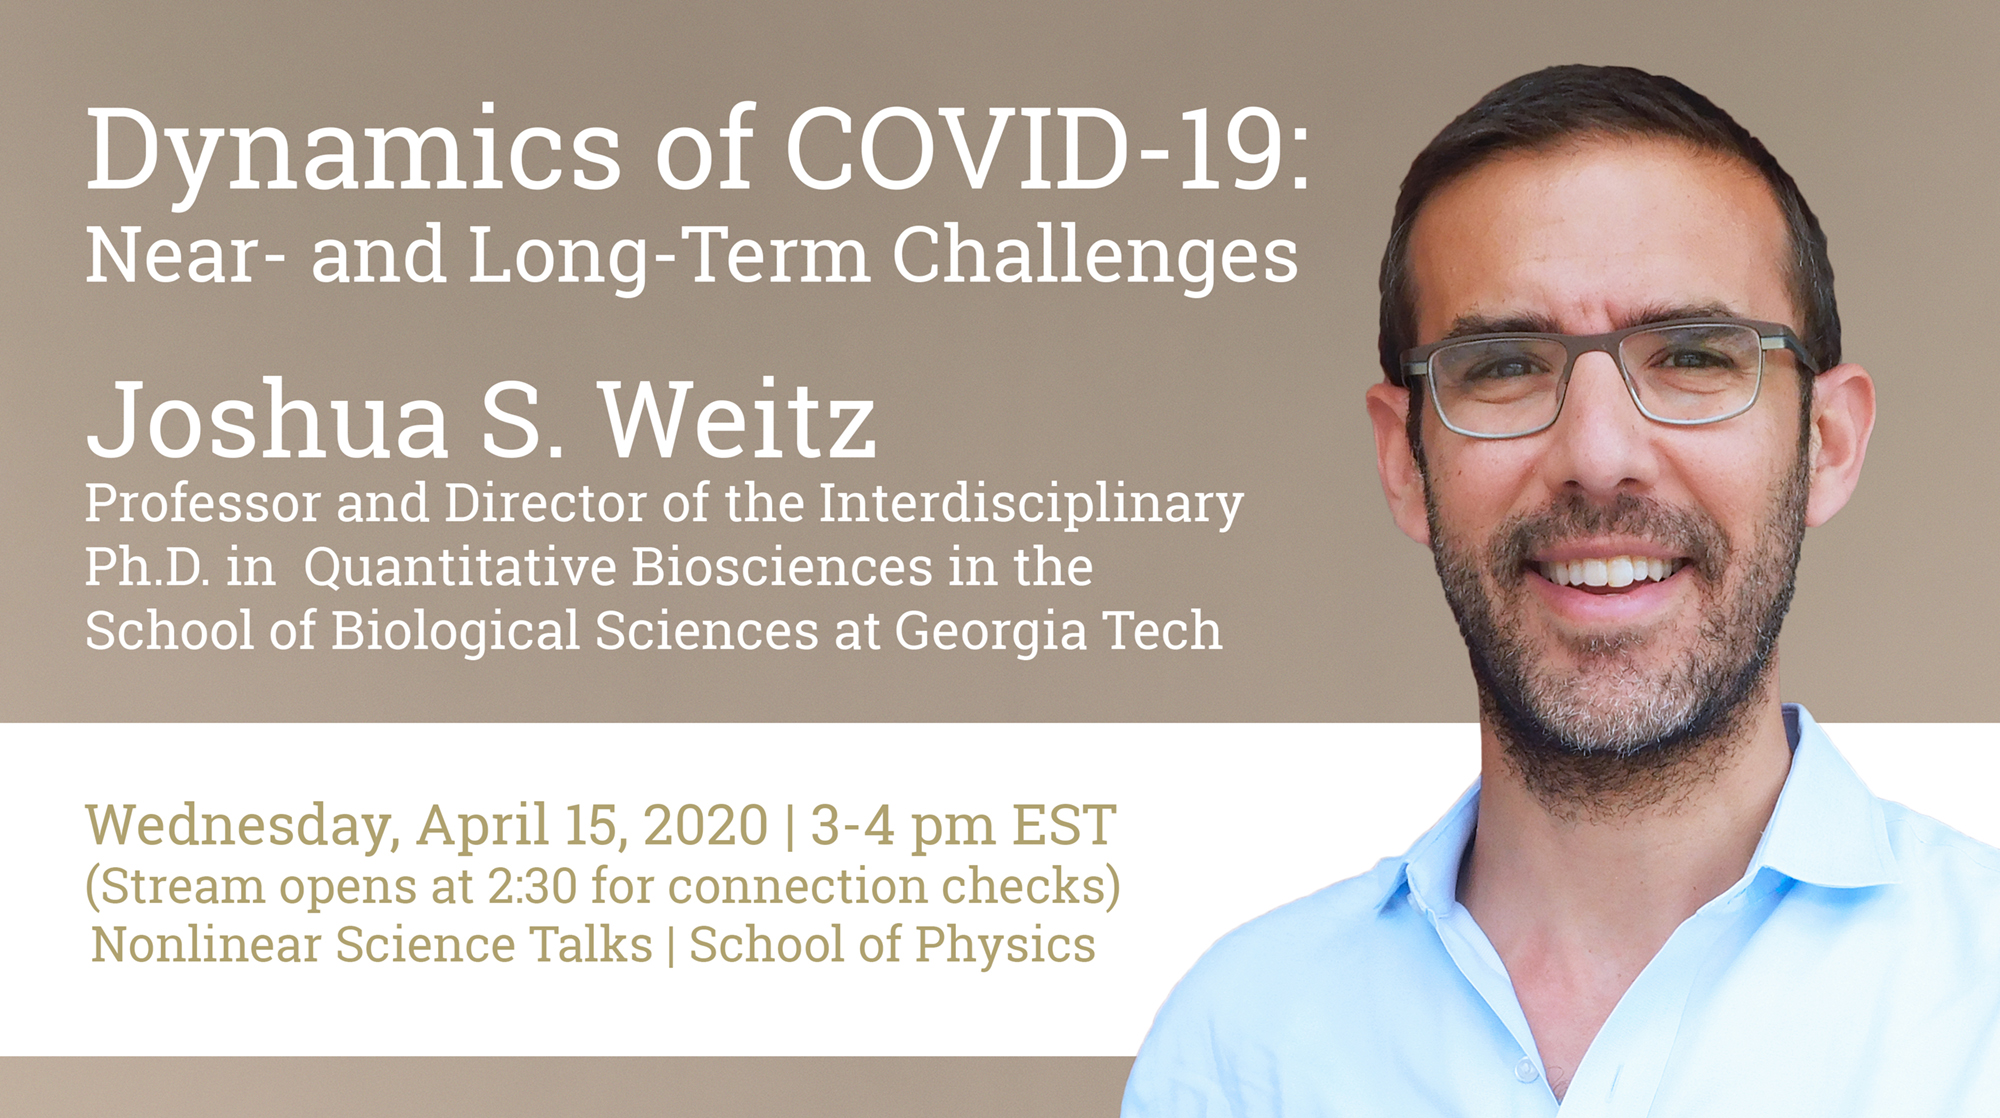 Dynamics of COVID-19: Near- and Long-Term Challenges